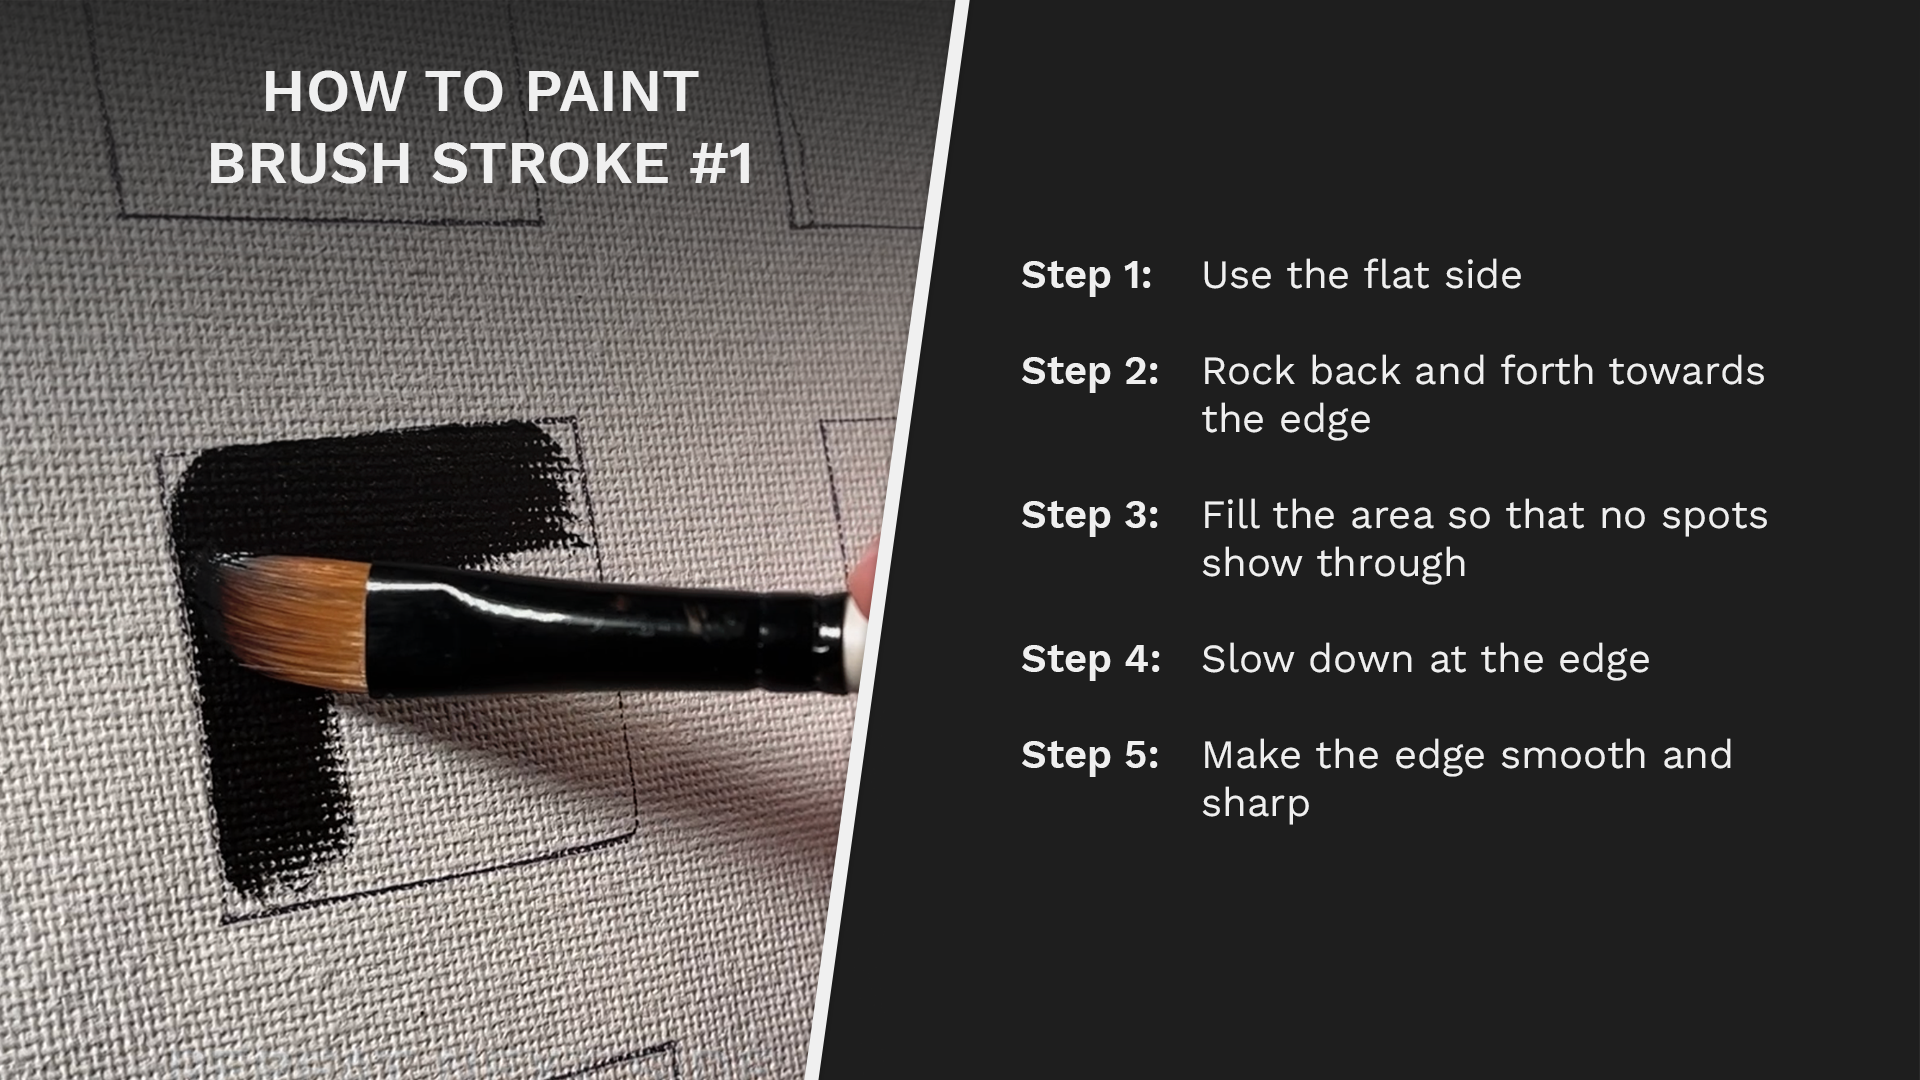 Follow these 5 steps to learn how tp paint Brush Stroke #1.